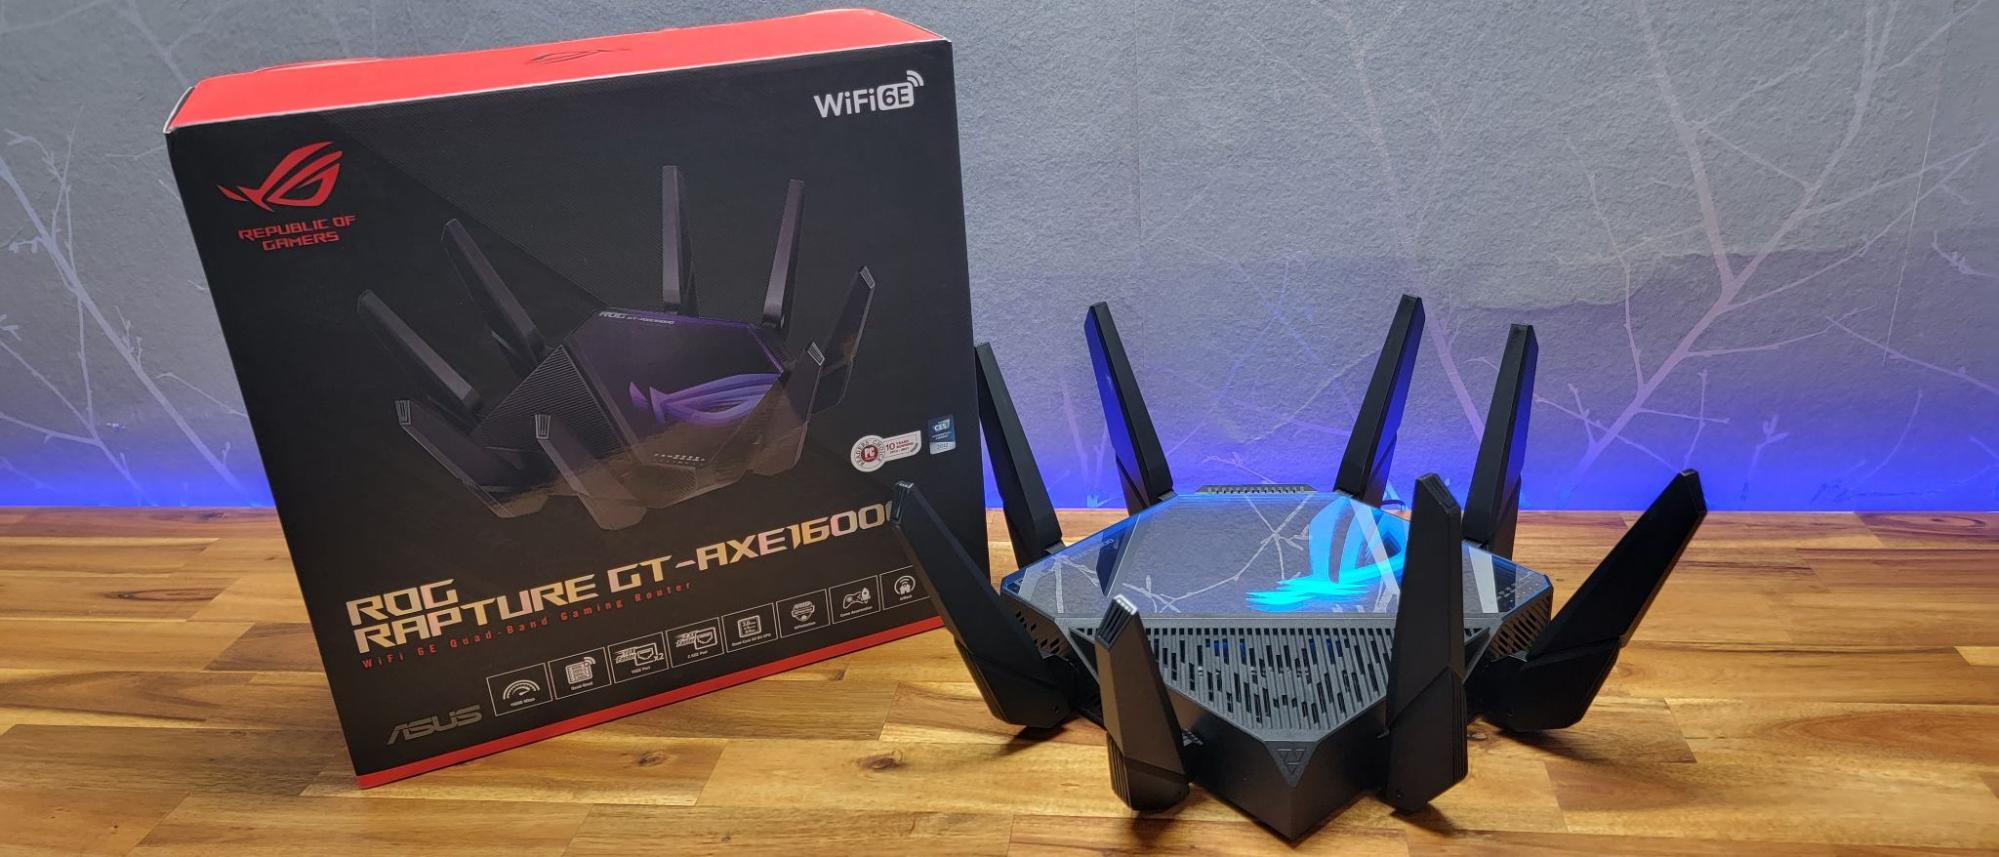 Experience LightningFast WiFi with Asus ROG Rapture GTAXE16000